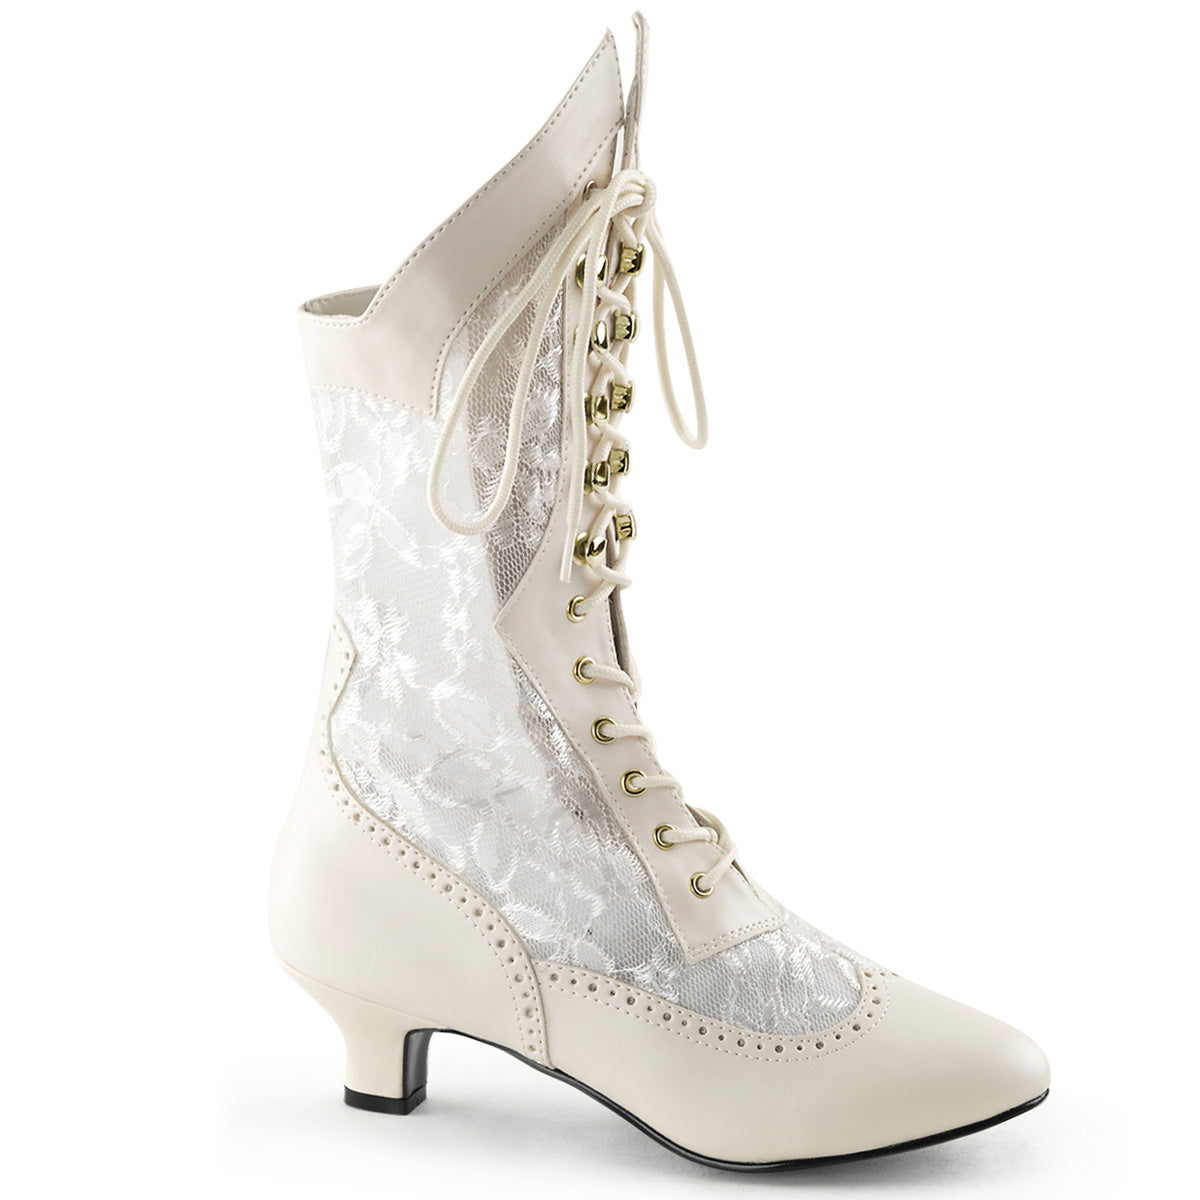 DAME-115 Black Ankle Boots White Multi view 1